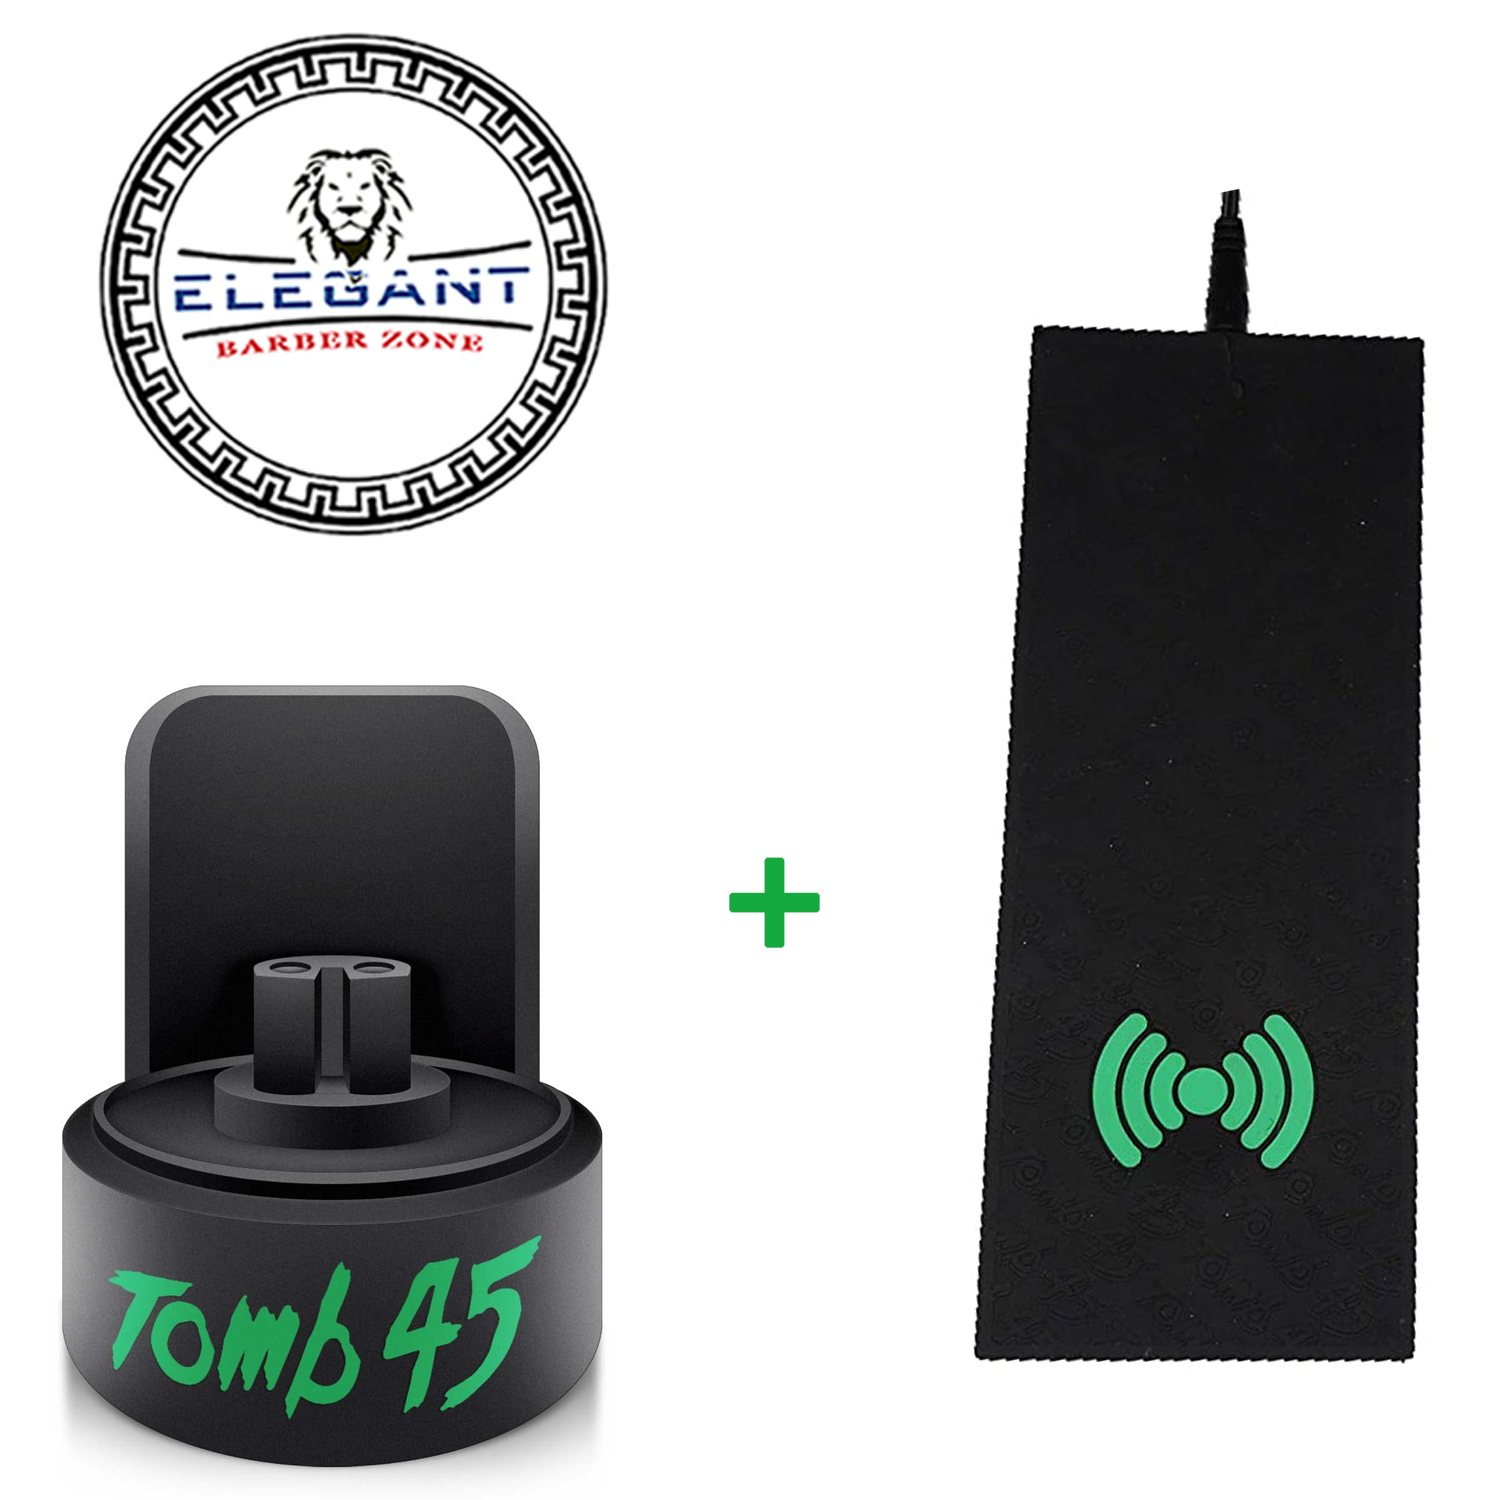 Tomb45 Power Clip Wireless Charging Adapter - Babyliss FX Trimmers